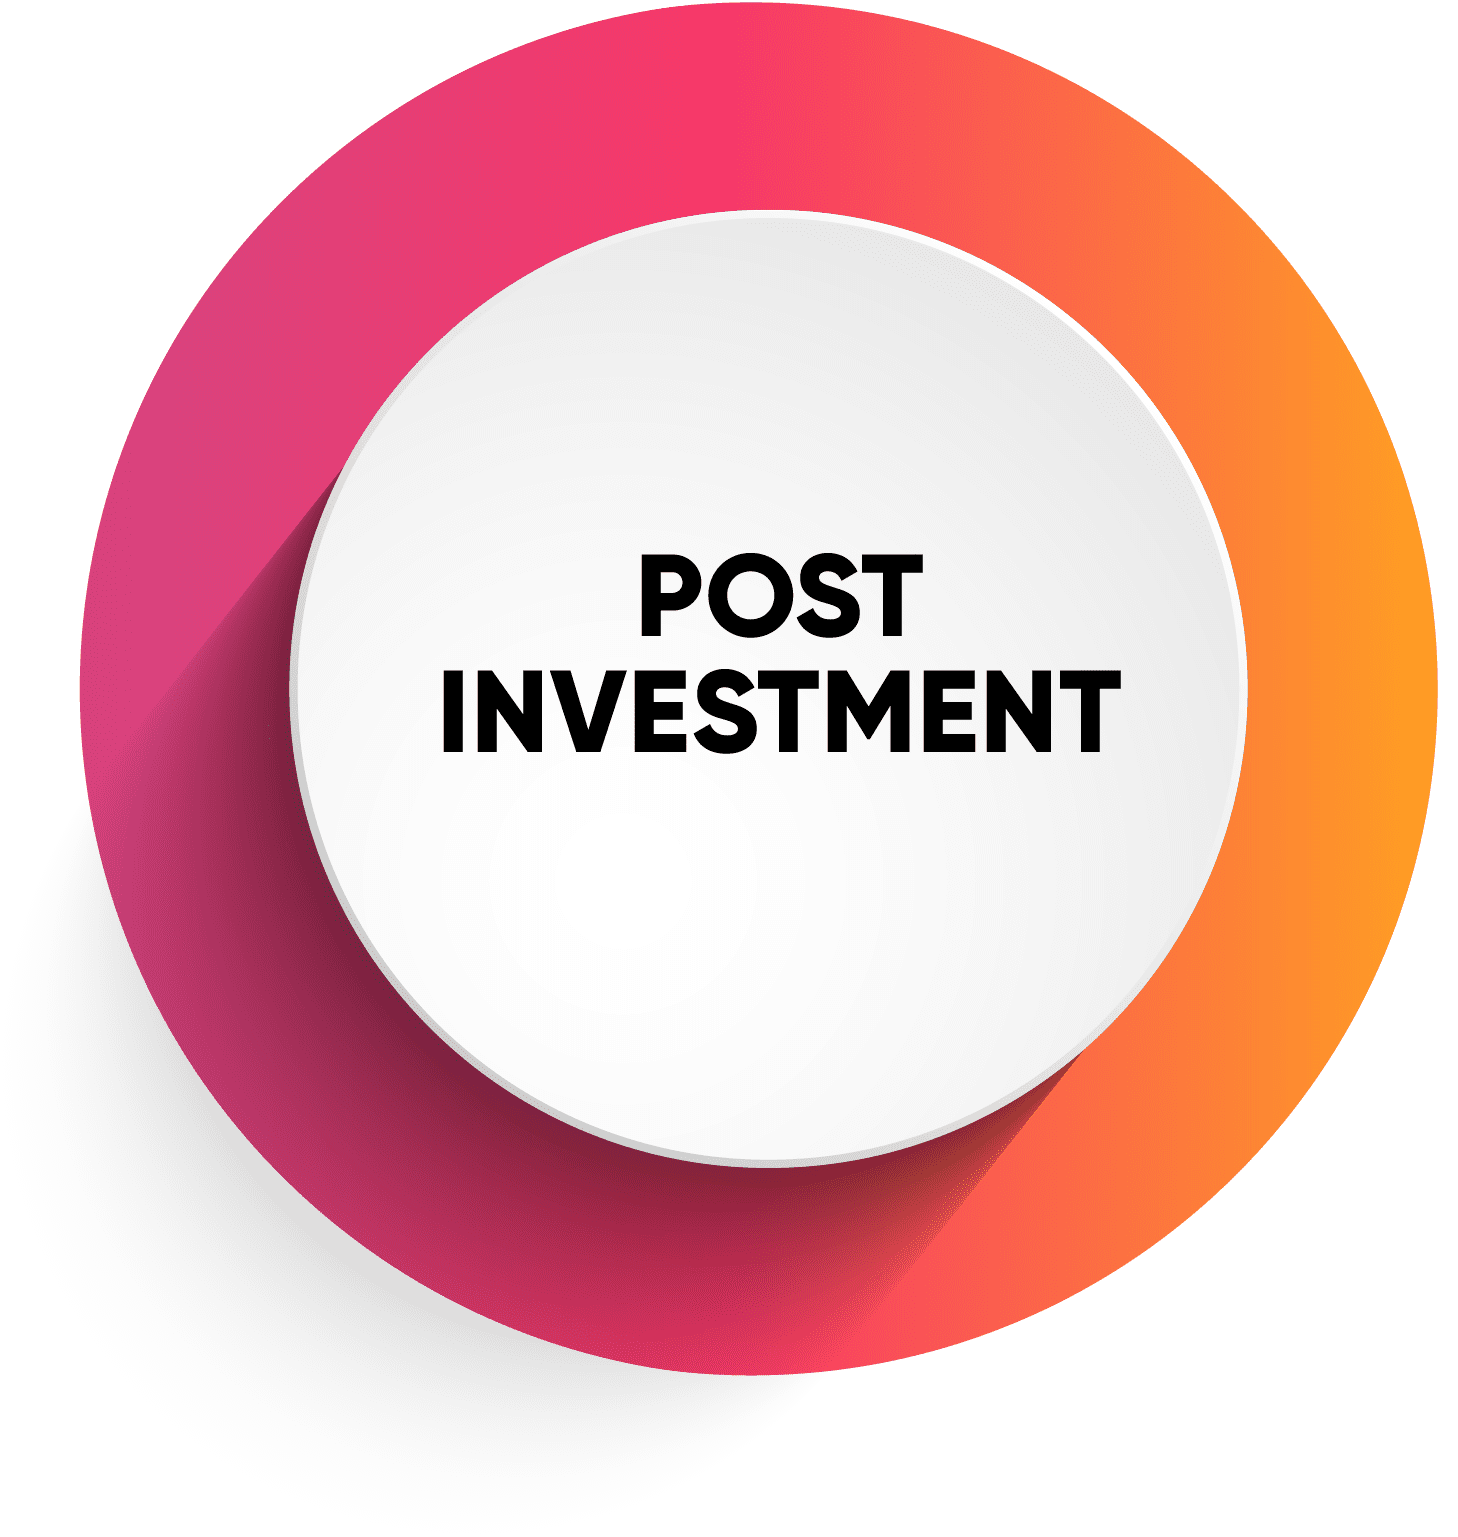 Post investment